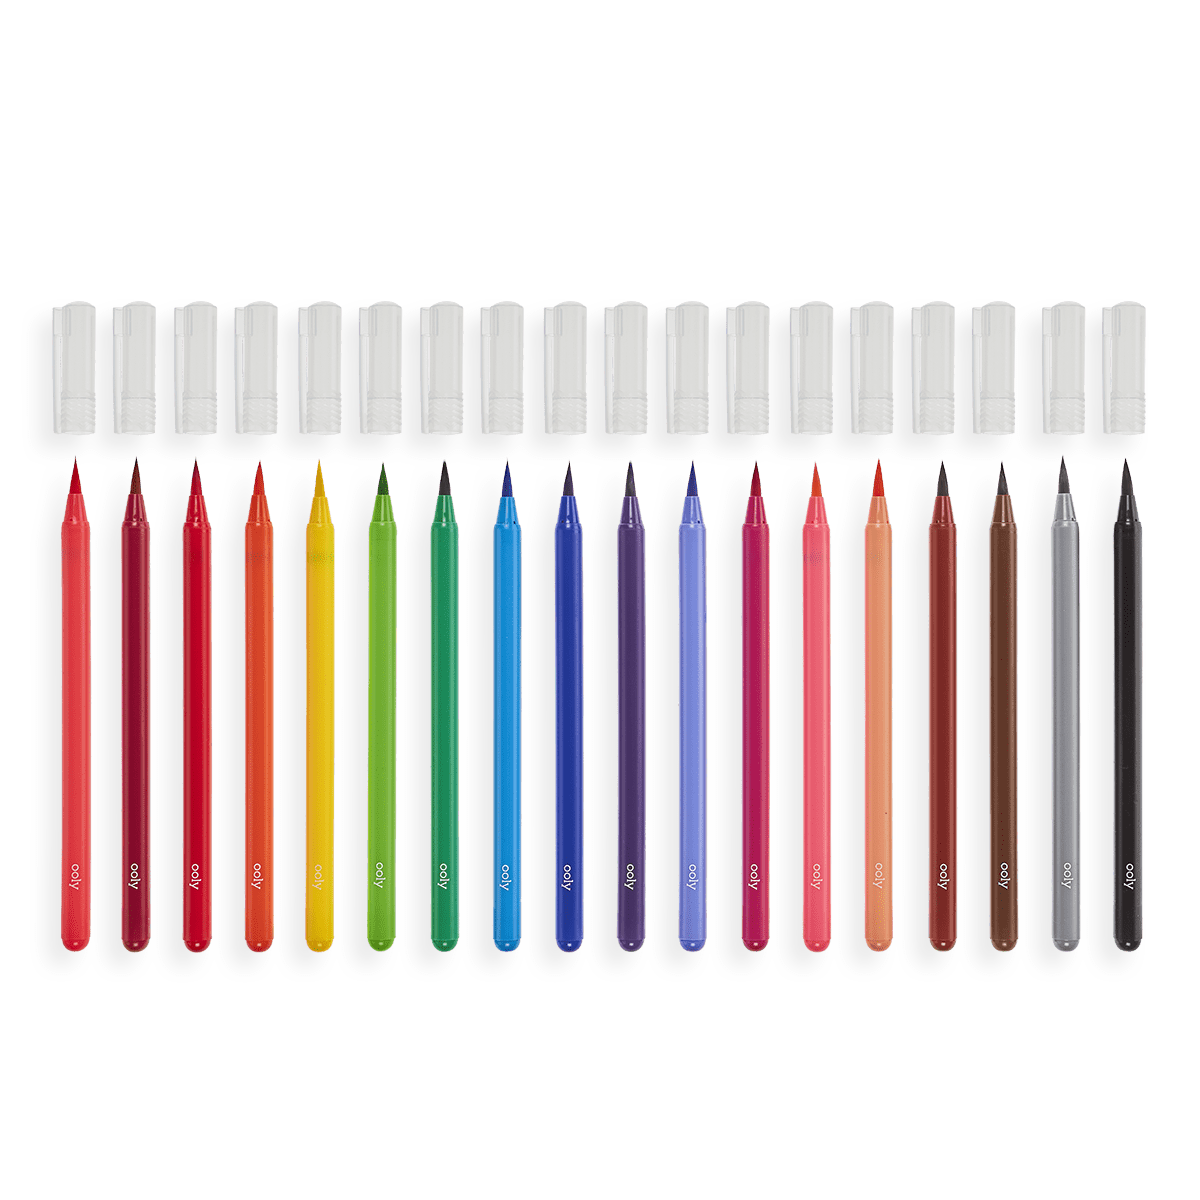 OOLY Chroma Blends Watercolor Brush Markers by OOLY